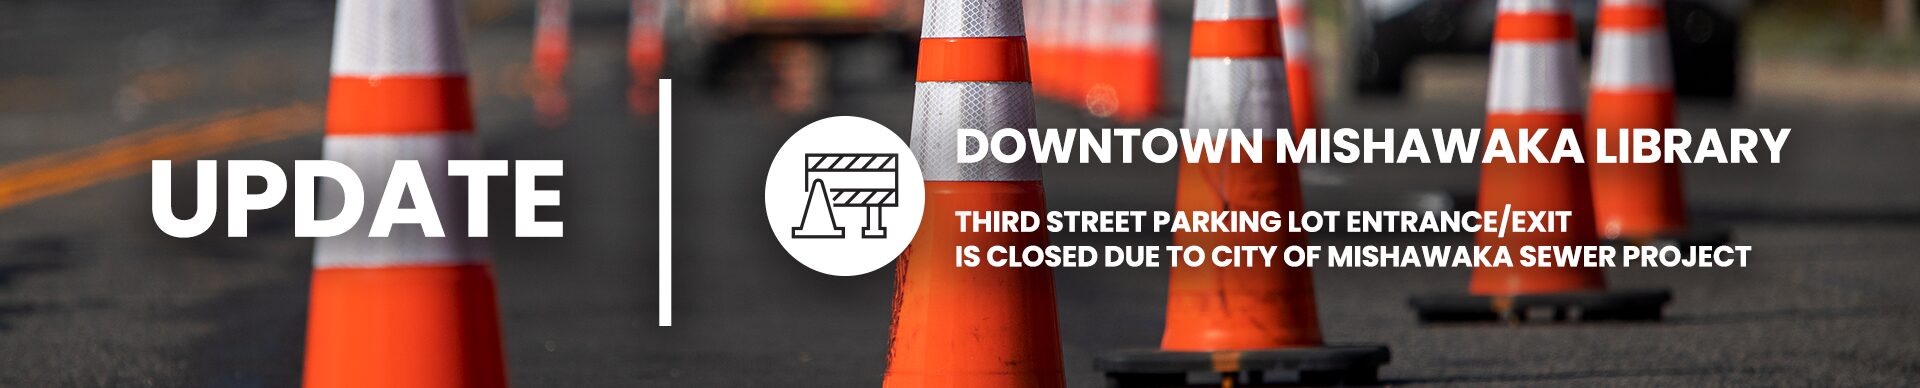 Reflective traffic cones on the street and image text, ‘DOWNTOWN MISHAWAKA LIBRARY THIRD STREET PARKING LOT ENTRANCE/EXIT IS CLOSED DUE TO CITY OF MISHAWAKA SEWER PROJECT’